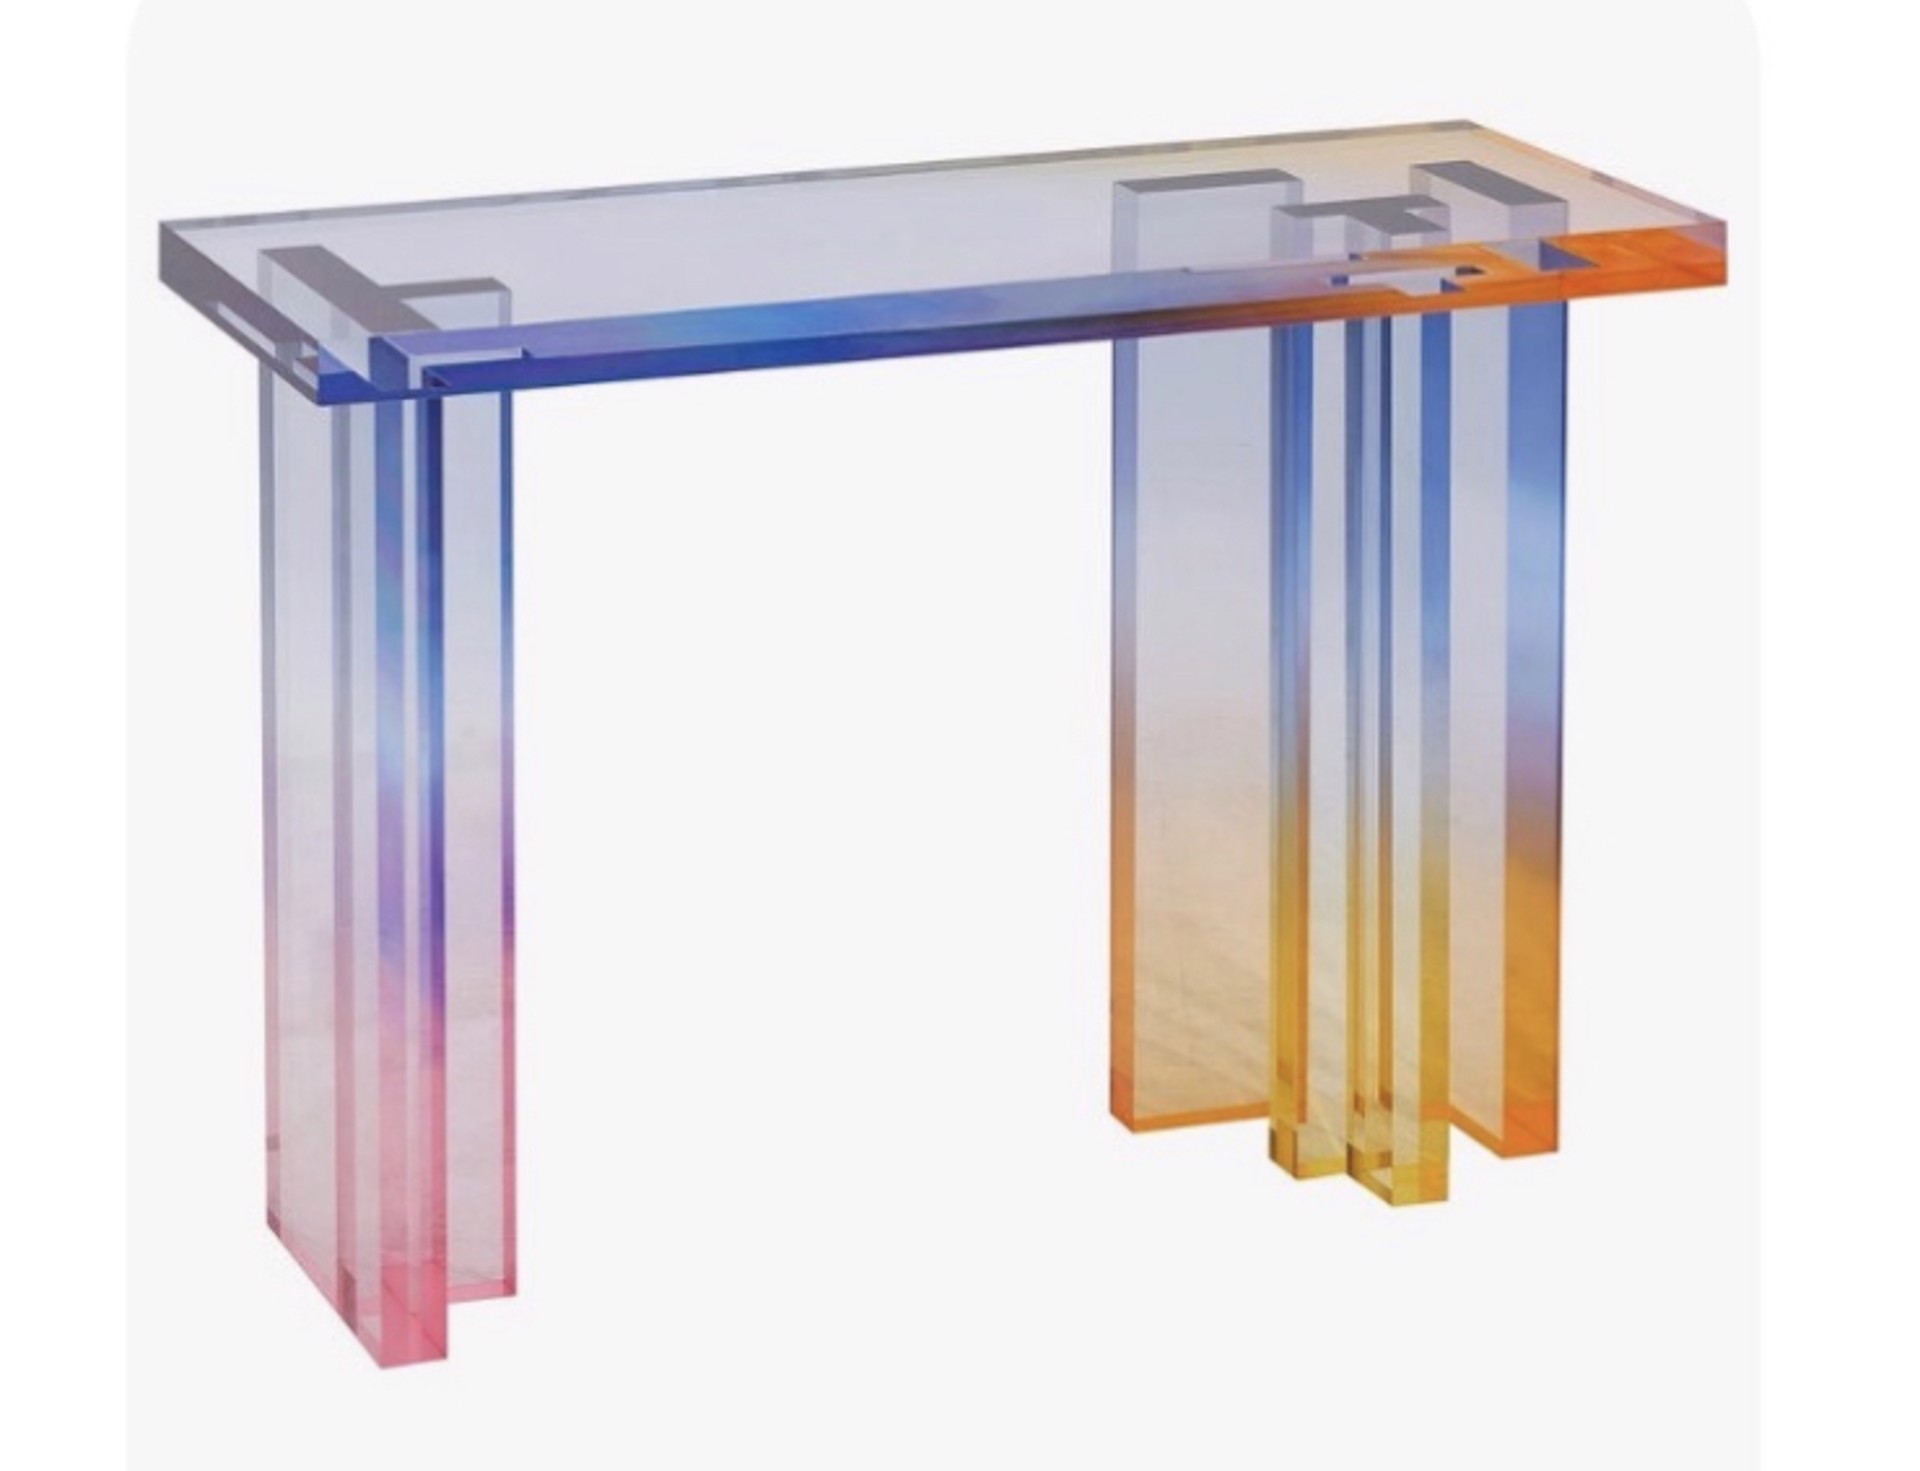 Acrylic Console Table #1 by Saerom Yoon